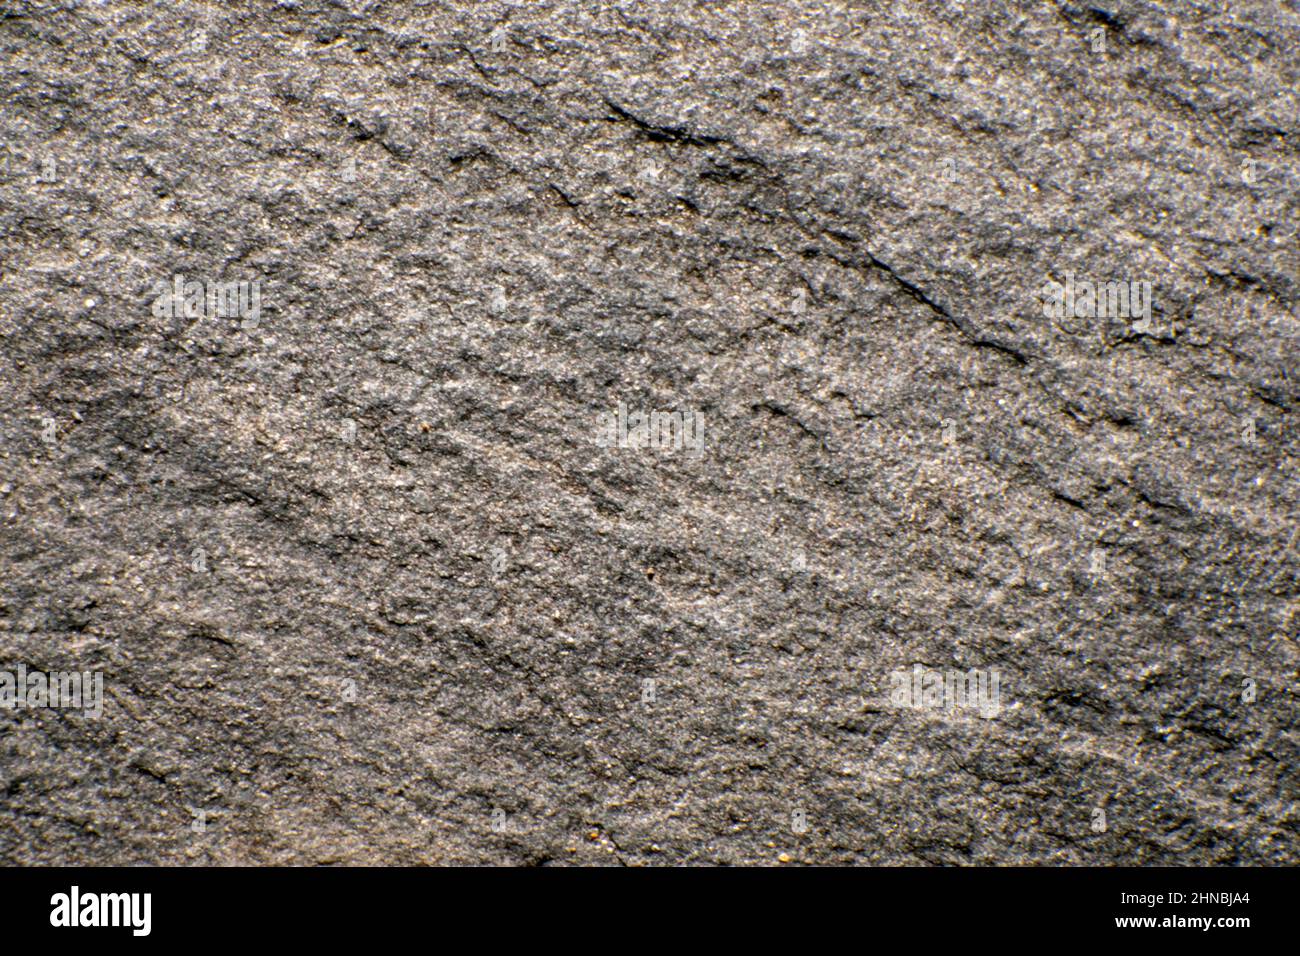 Shale stone close-up. Shale stone is a fine-grained sedimentary rock that is formed when silt and clay are compressed. Stock Photo